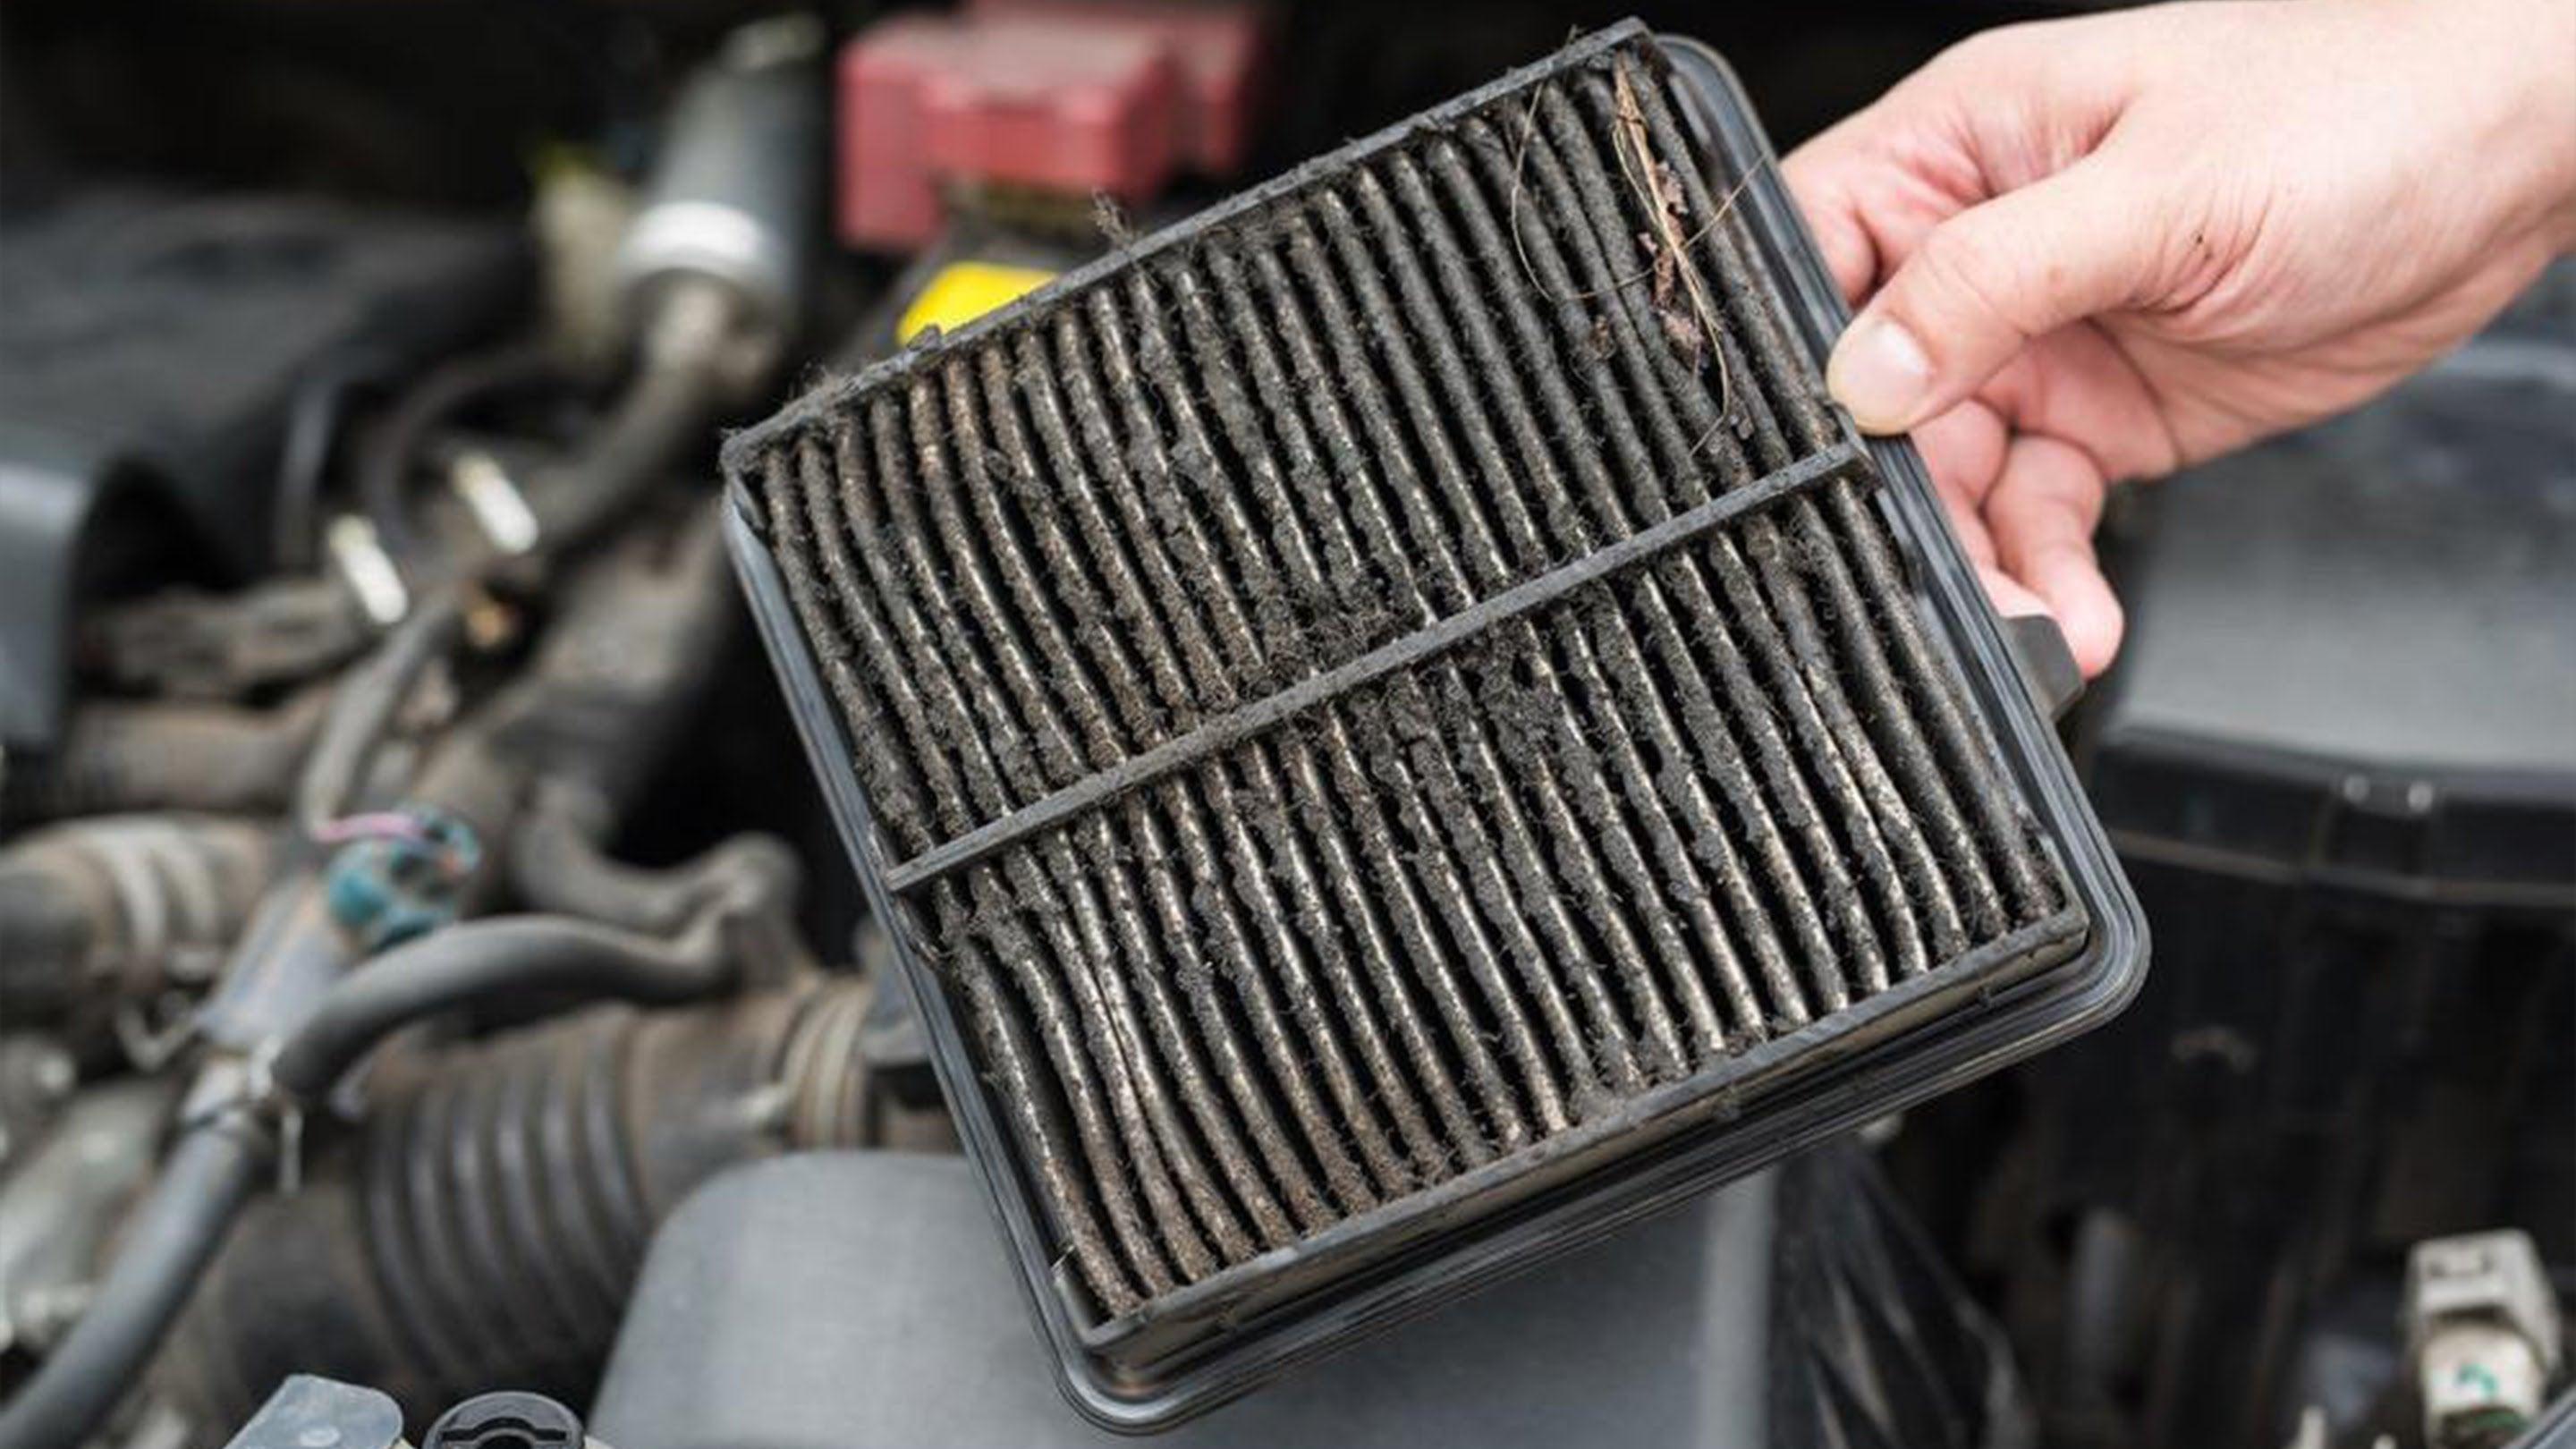 Dirty air filter removed from vehicle